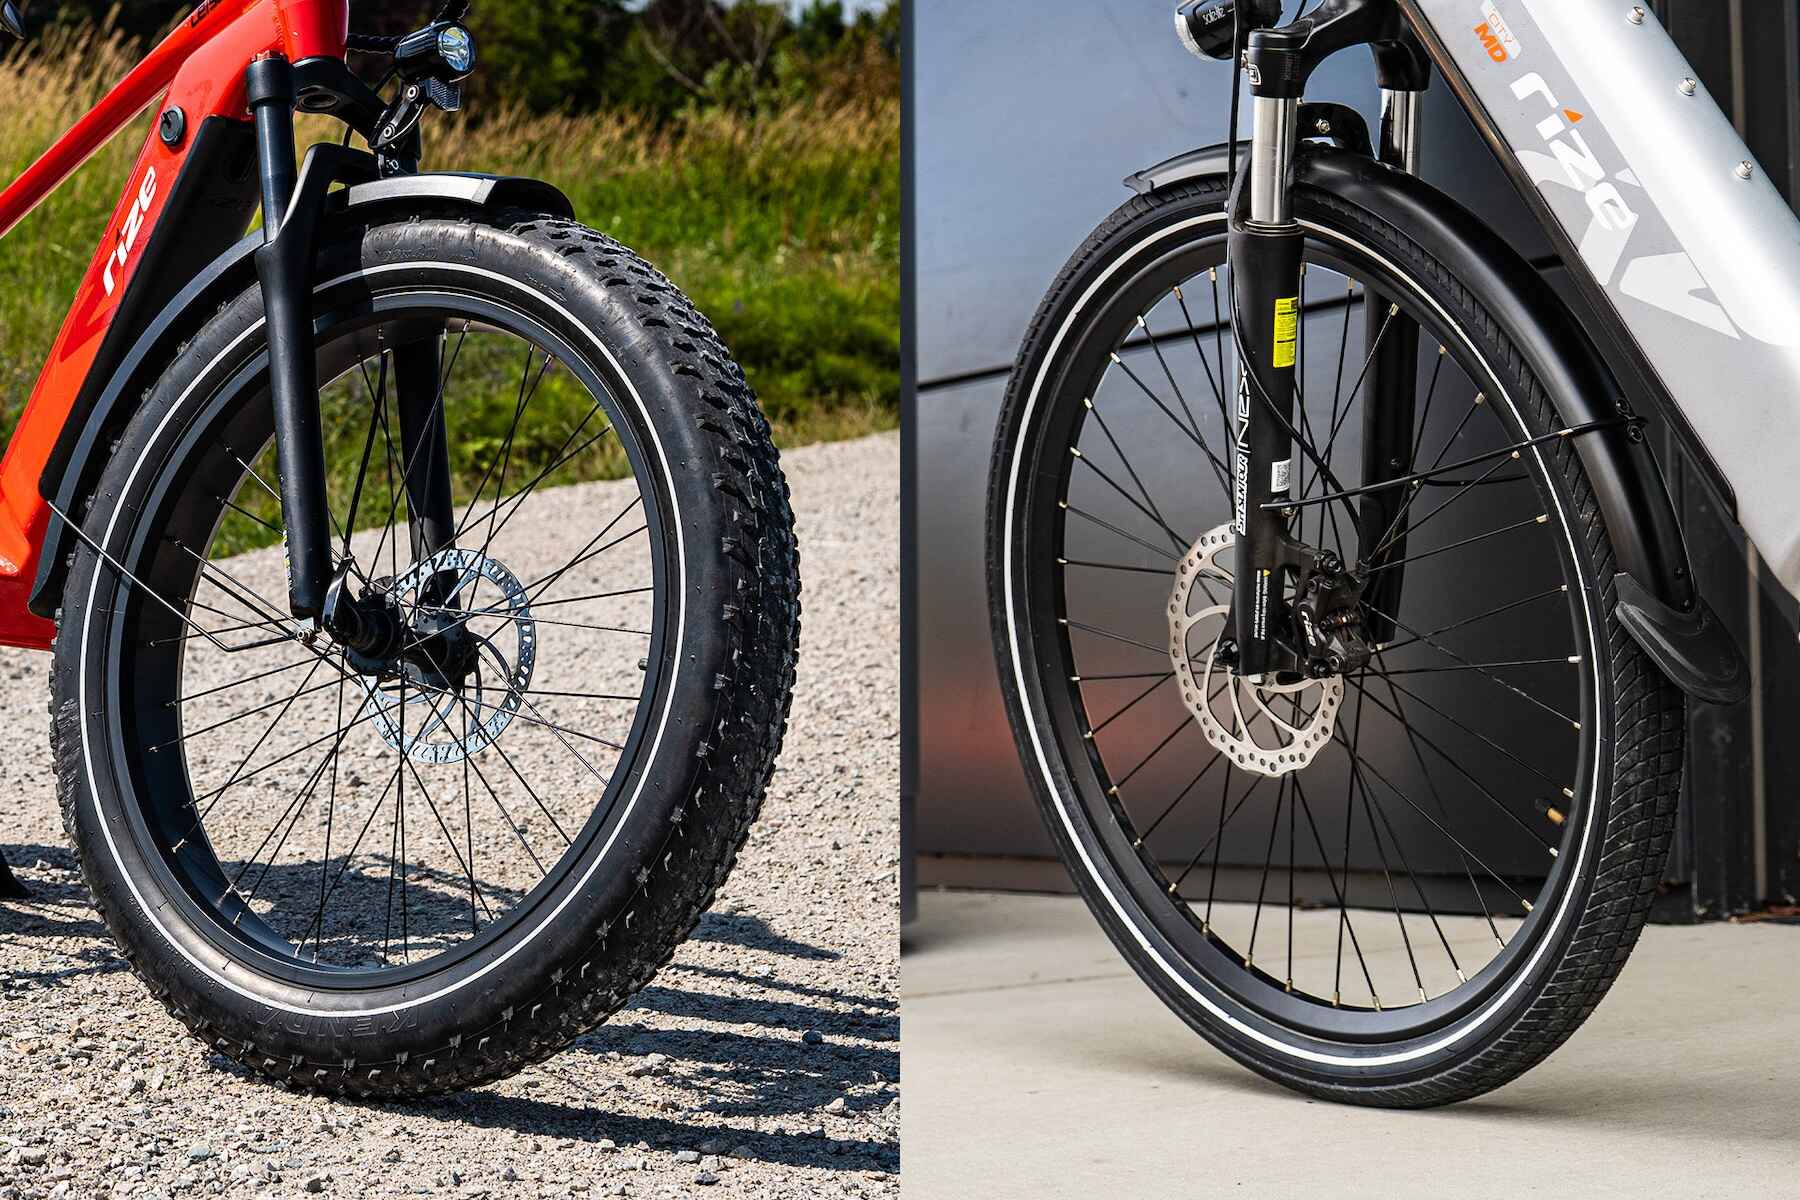 Fat Tire VS Regular Tire eBike: Which Is Better and Why?